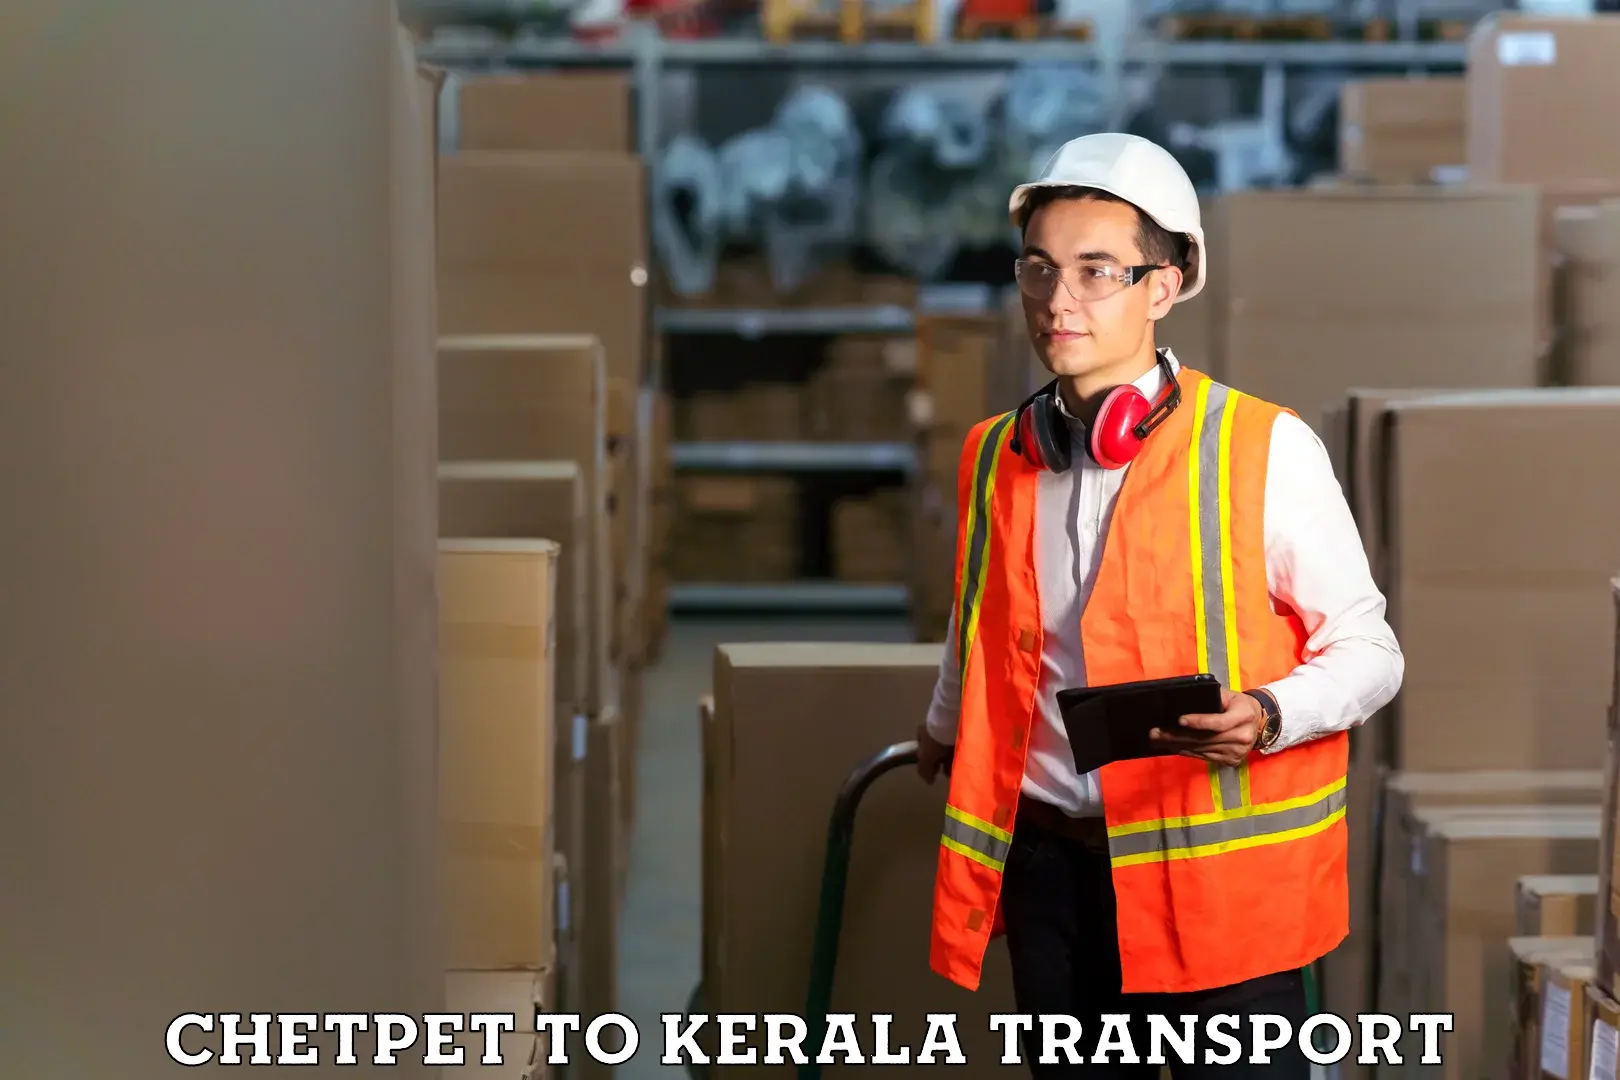 Commercial transport service Chetpet to Kanhangad